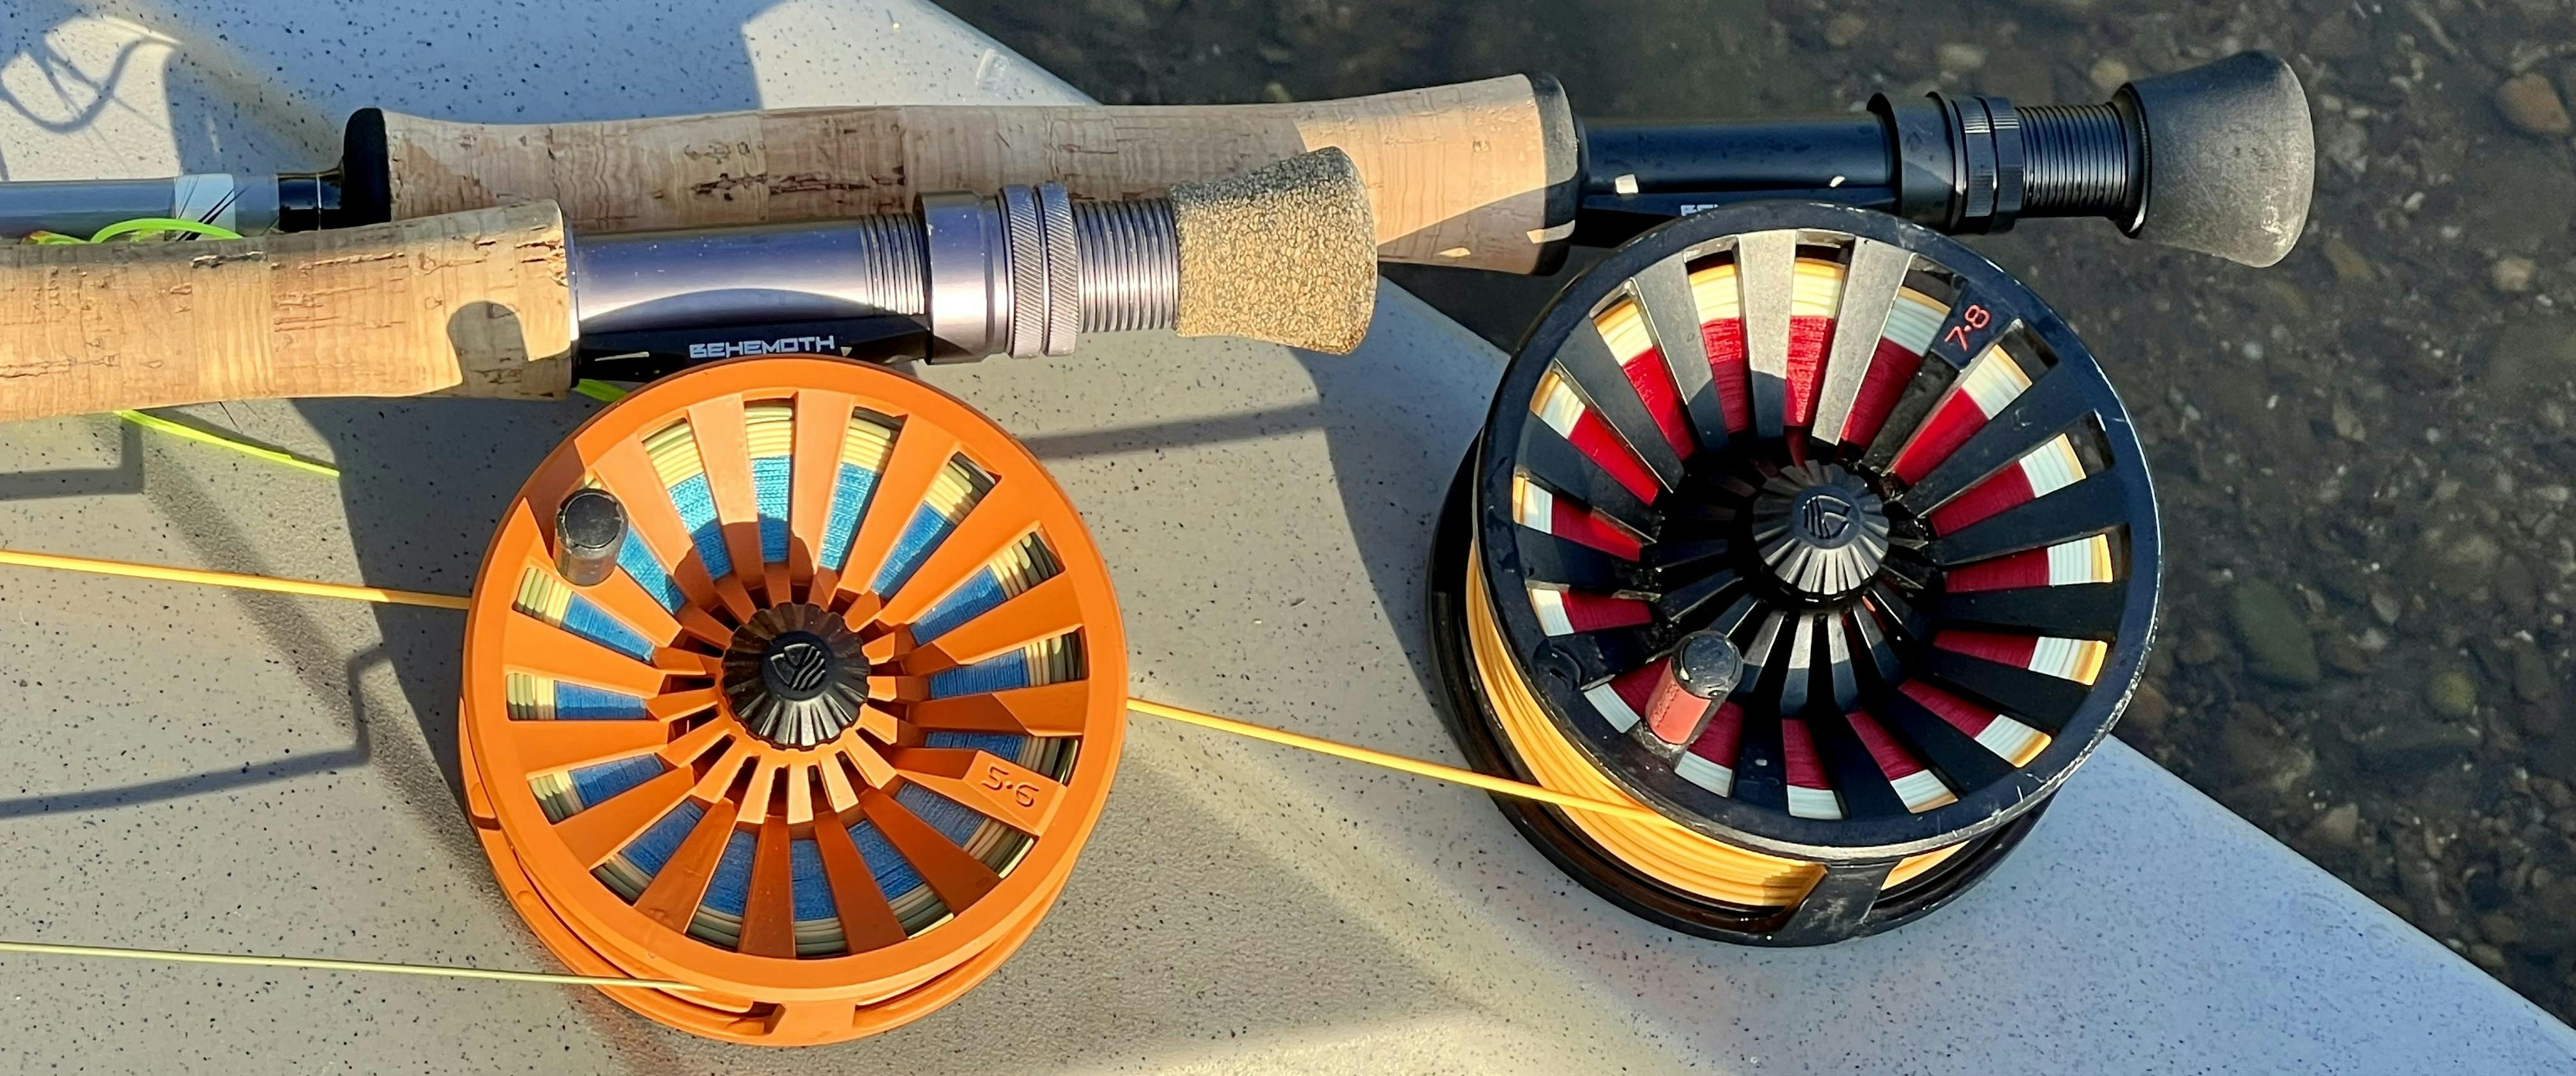 TFO BVK SD Fly Reel - The Fly Shack Fly Fishing